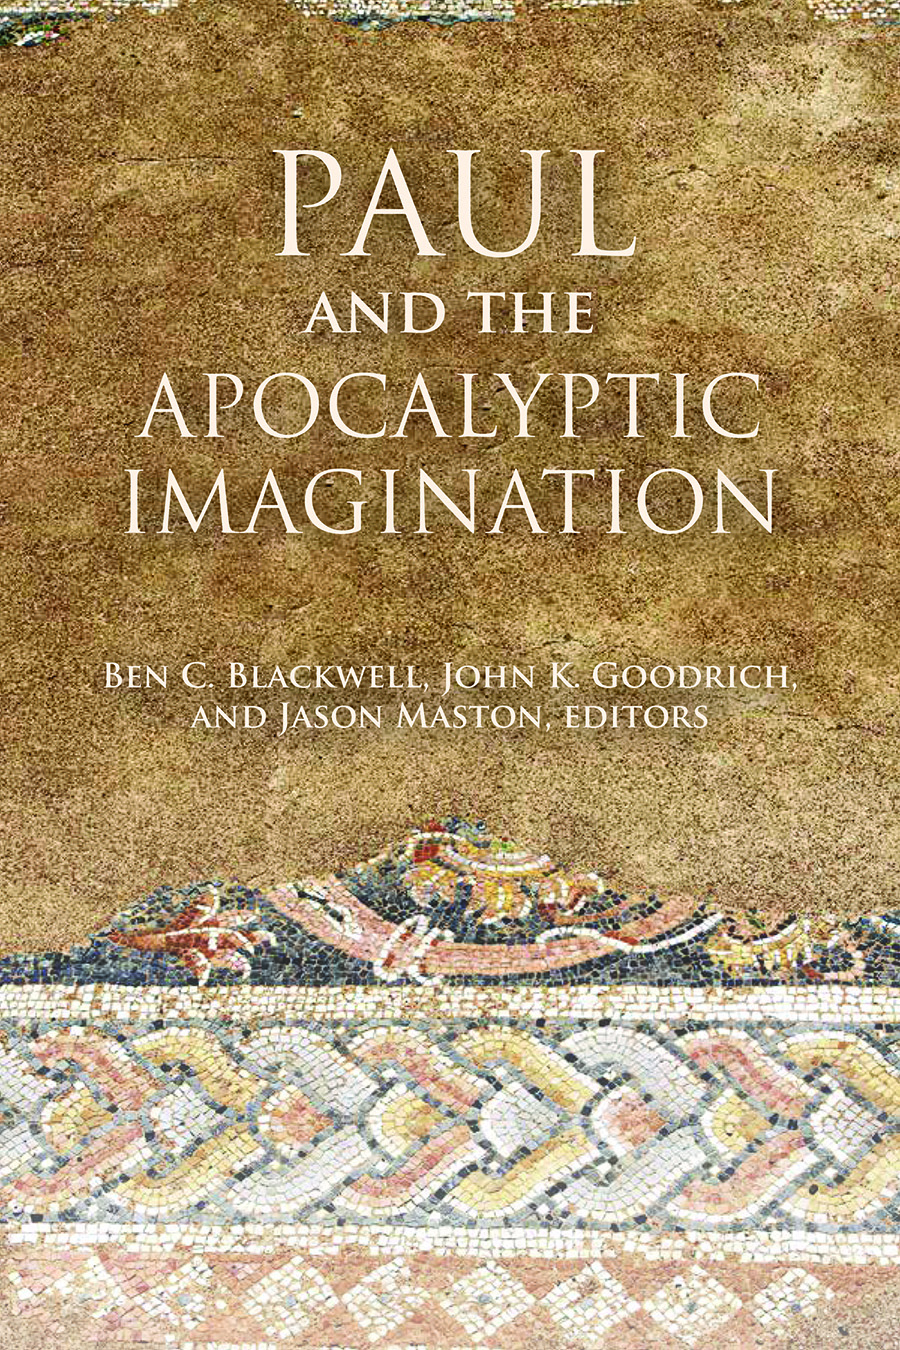 Apocalyptic as Theoria in the Letters of St. Paul: A New Perspective on Apocalyptic as Mother of Theology